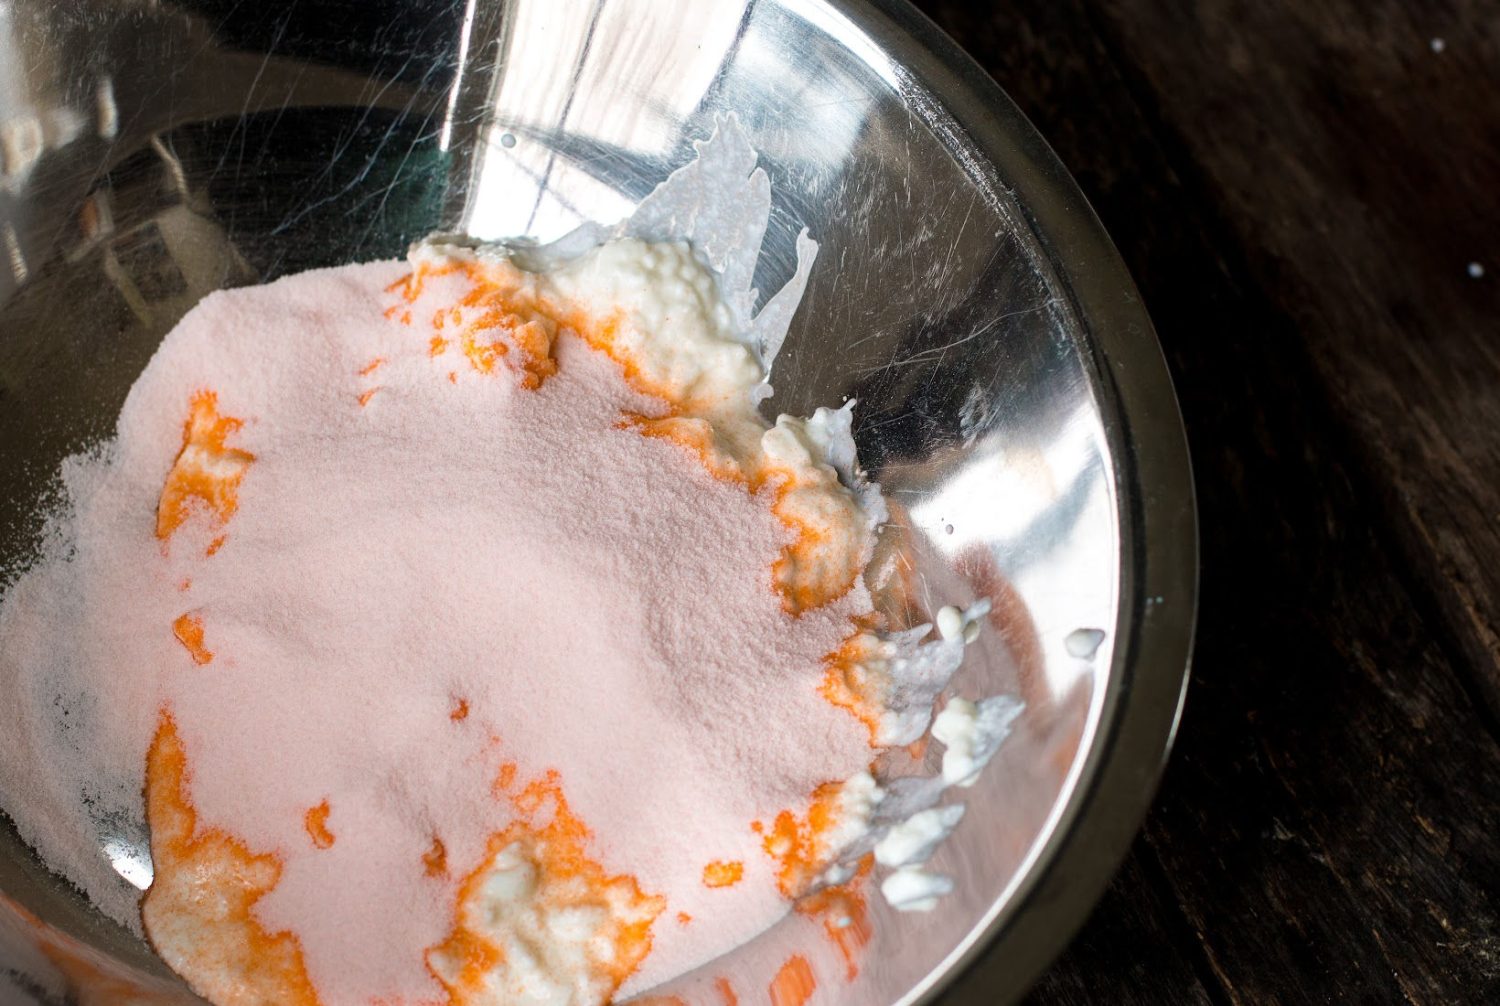 orange jello powder sprinkled over the cottage cheese in a stainless steel bowl.